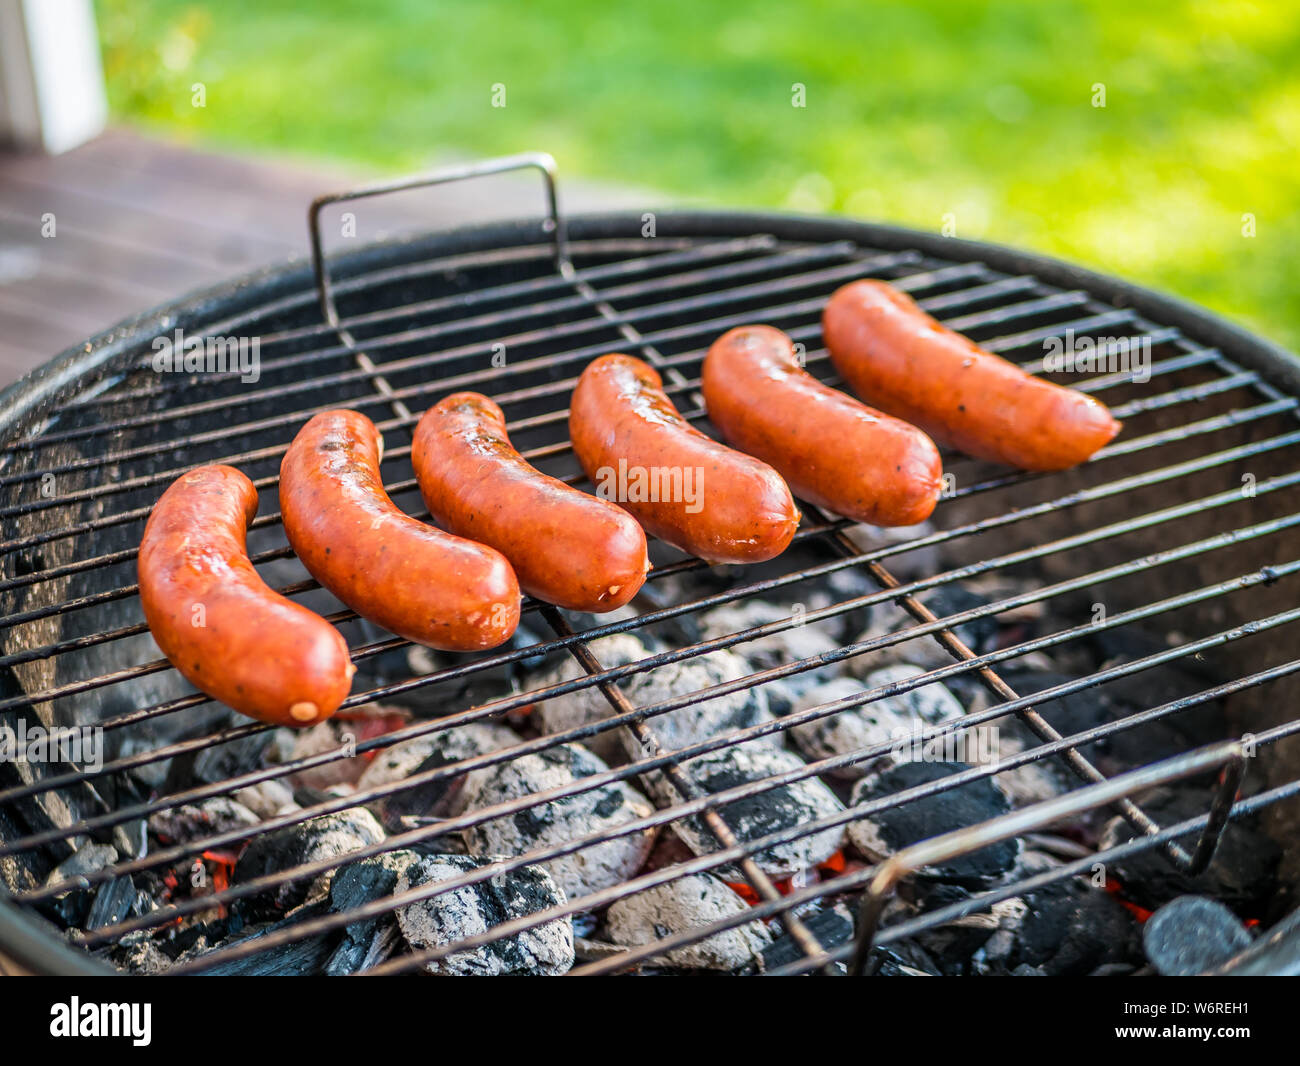 Grill Sausage on a hot col or briquettes at home or in the back yard. Stock Photo